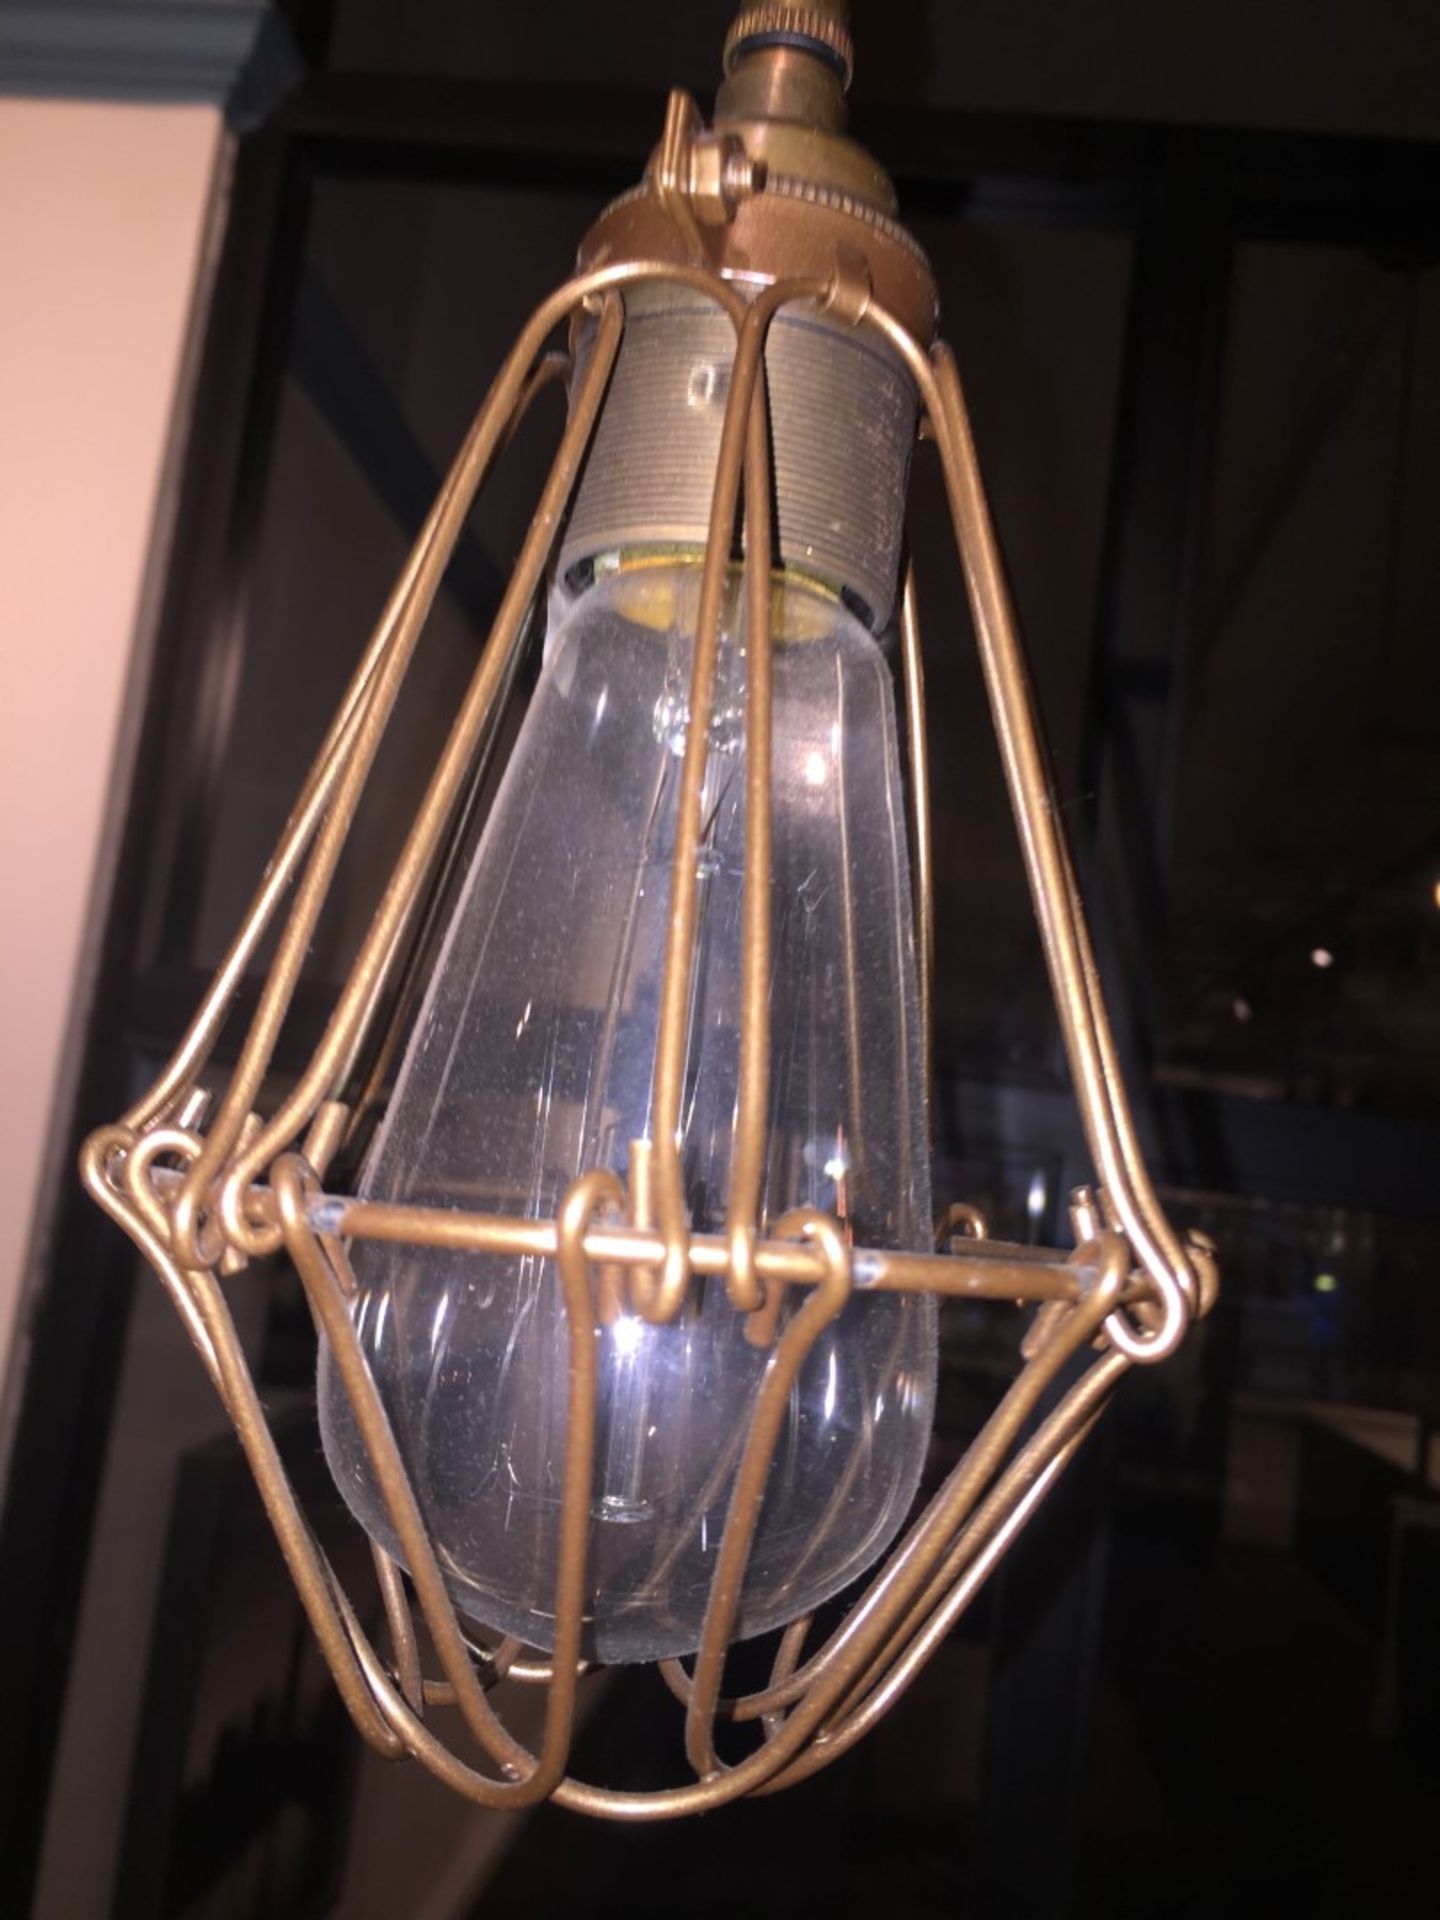 1 x Designer Industrial-Style Triple Pendant Light Fitting - Approx Dimensions: Diameter 12cm, Drop - Image 2 of 4